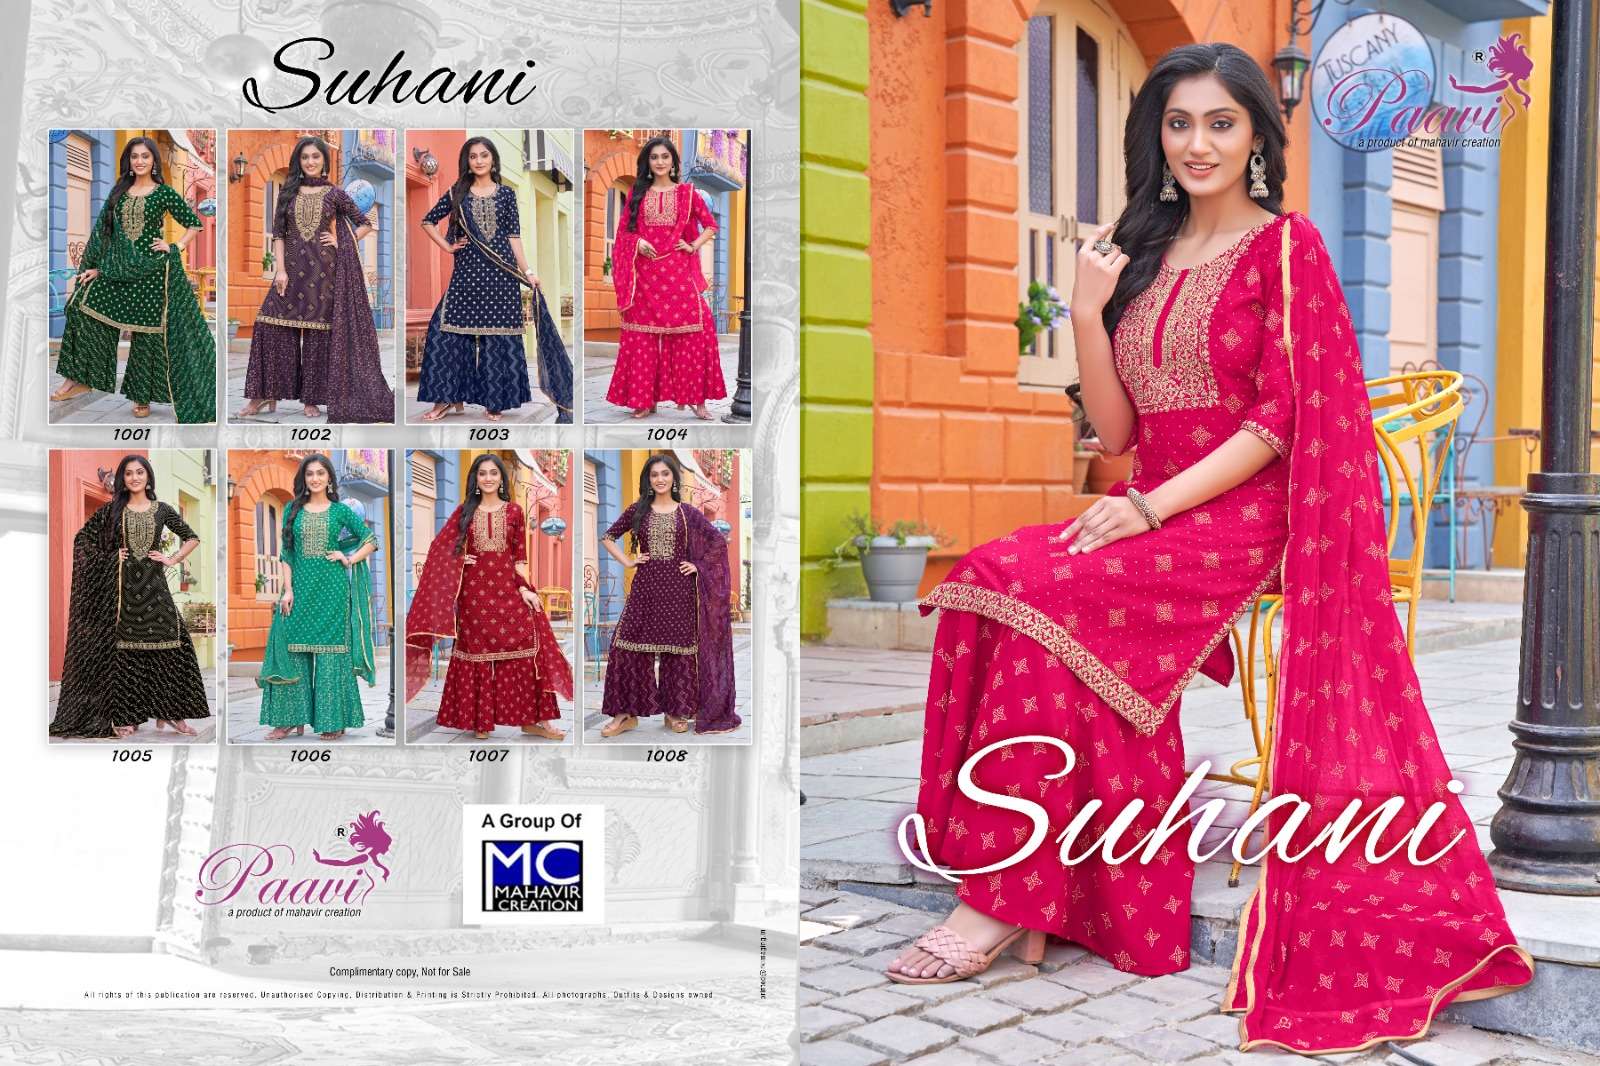 paavis suhani 1001-1008 series rayon fancy top bottom with with dupatta set wholesale price surat